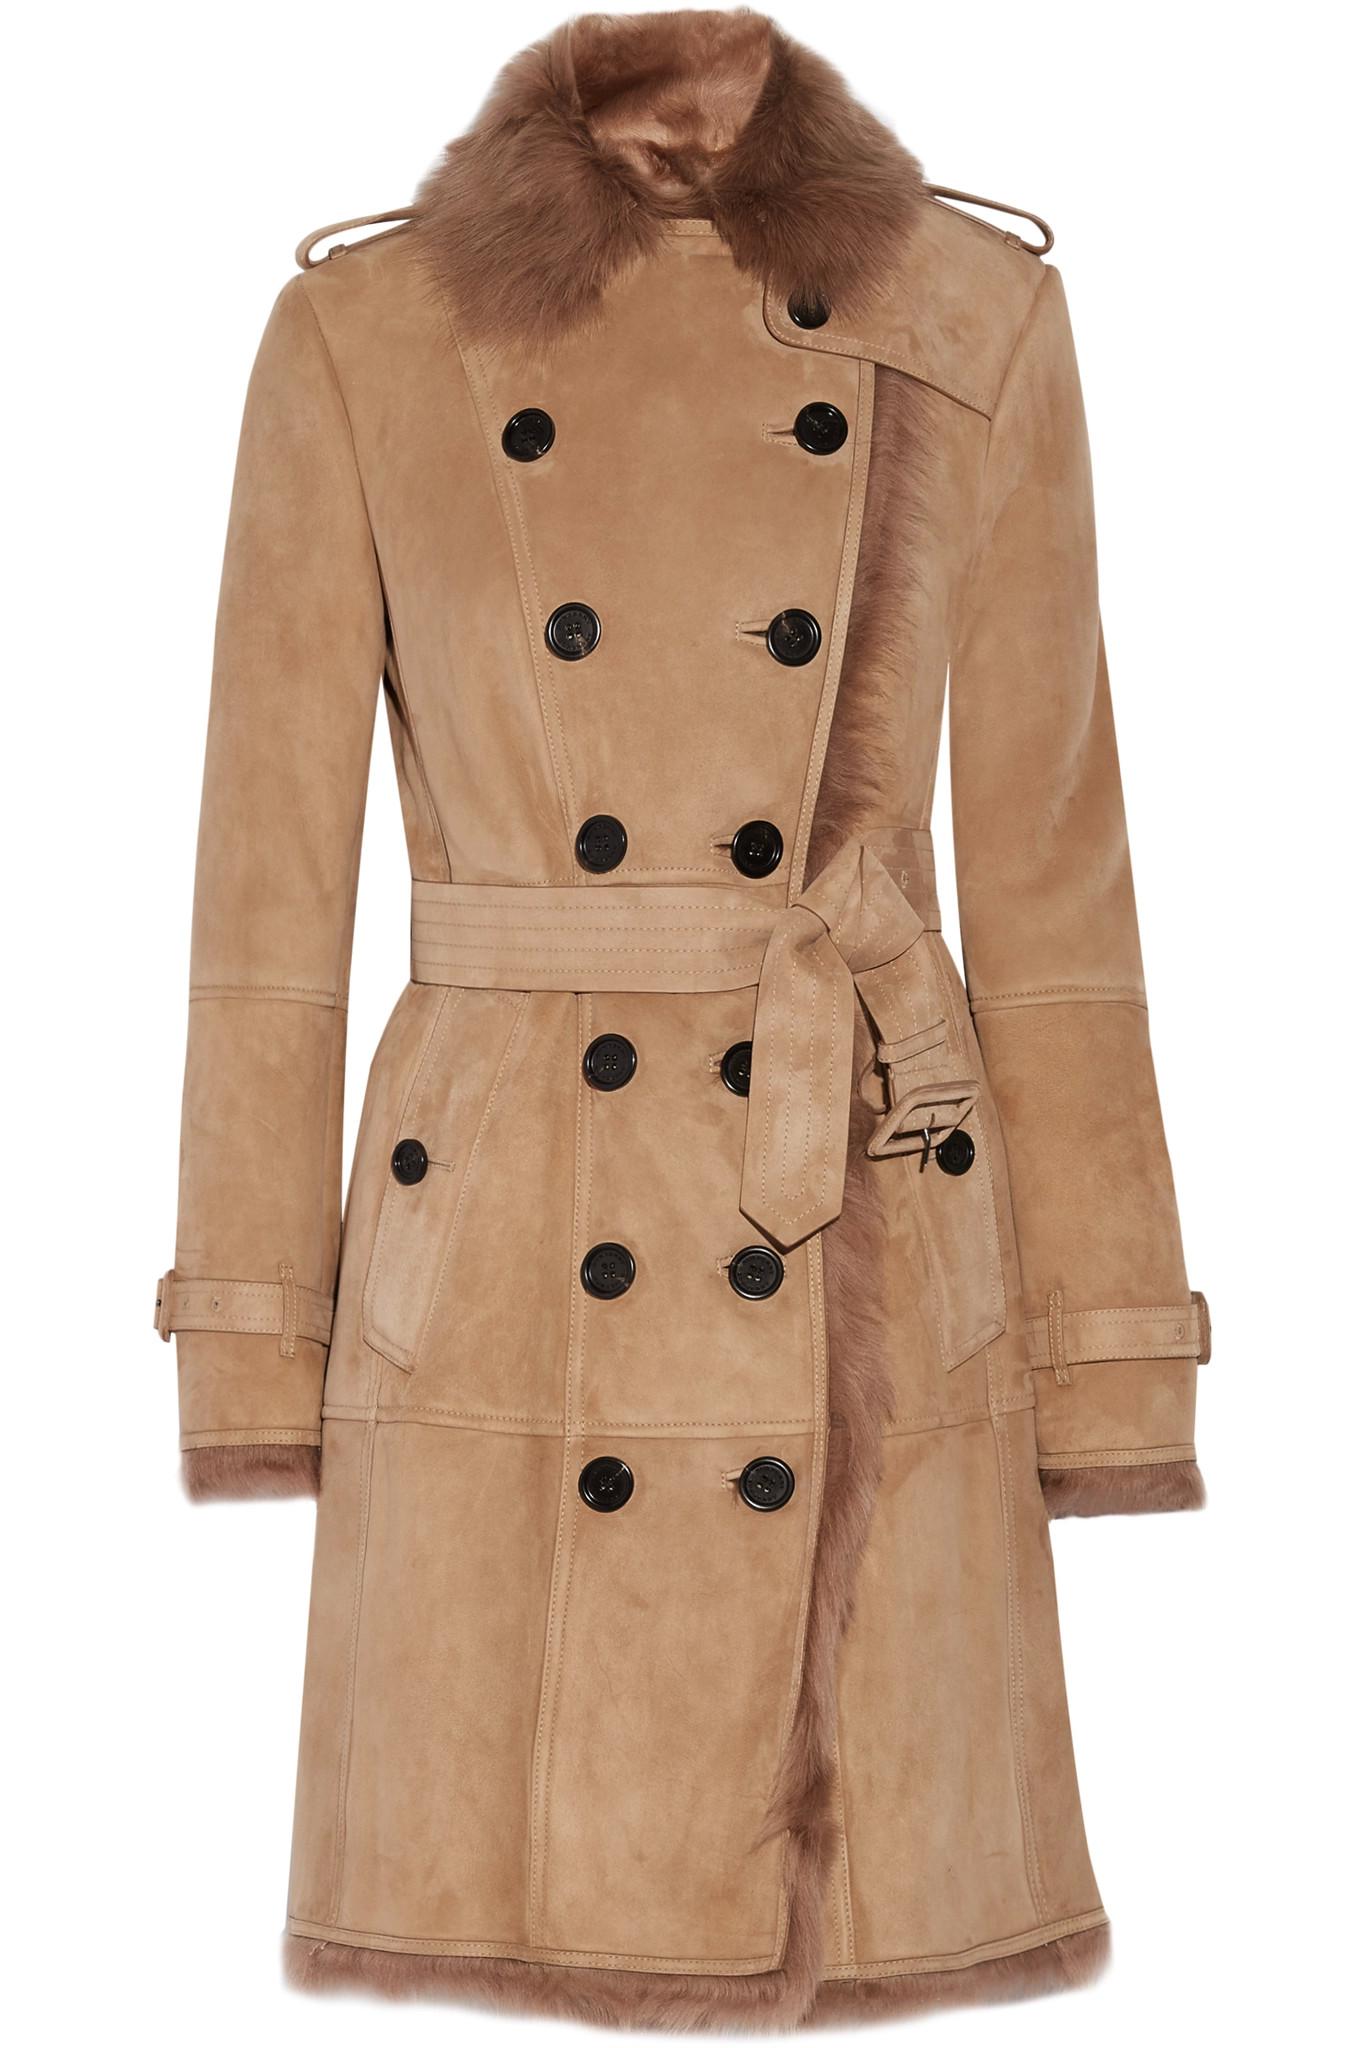 Burberry Toddingwall Shearling Trench Coat in Camel (Blue) - Lyst